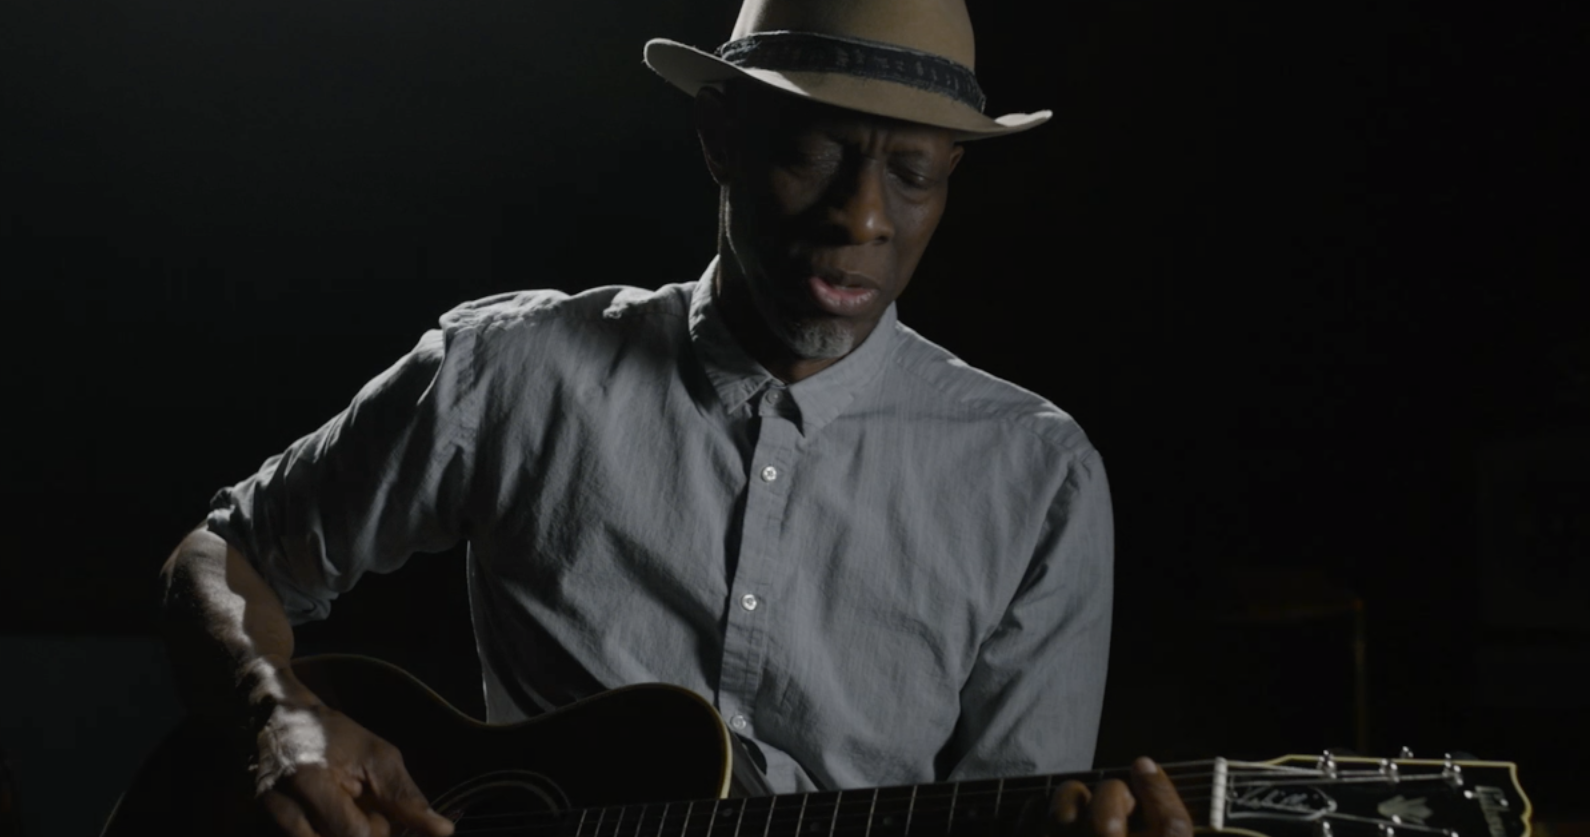 Candid Records Releases Video for “Taking Me Higher” by Keb’ Mo’